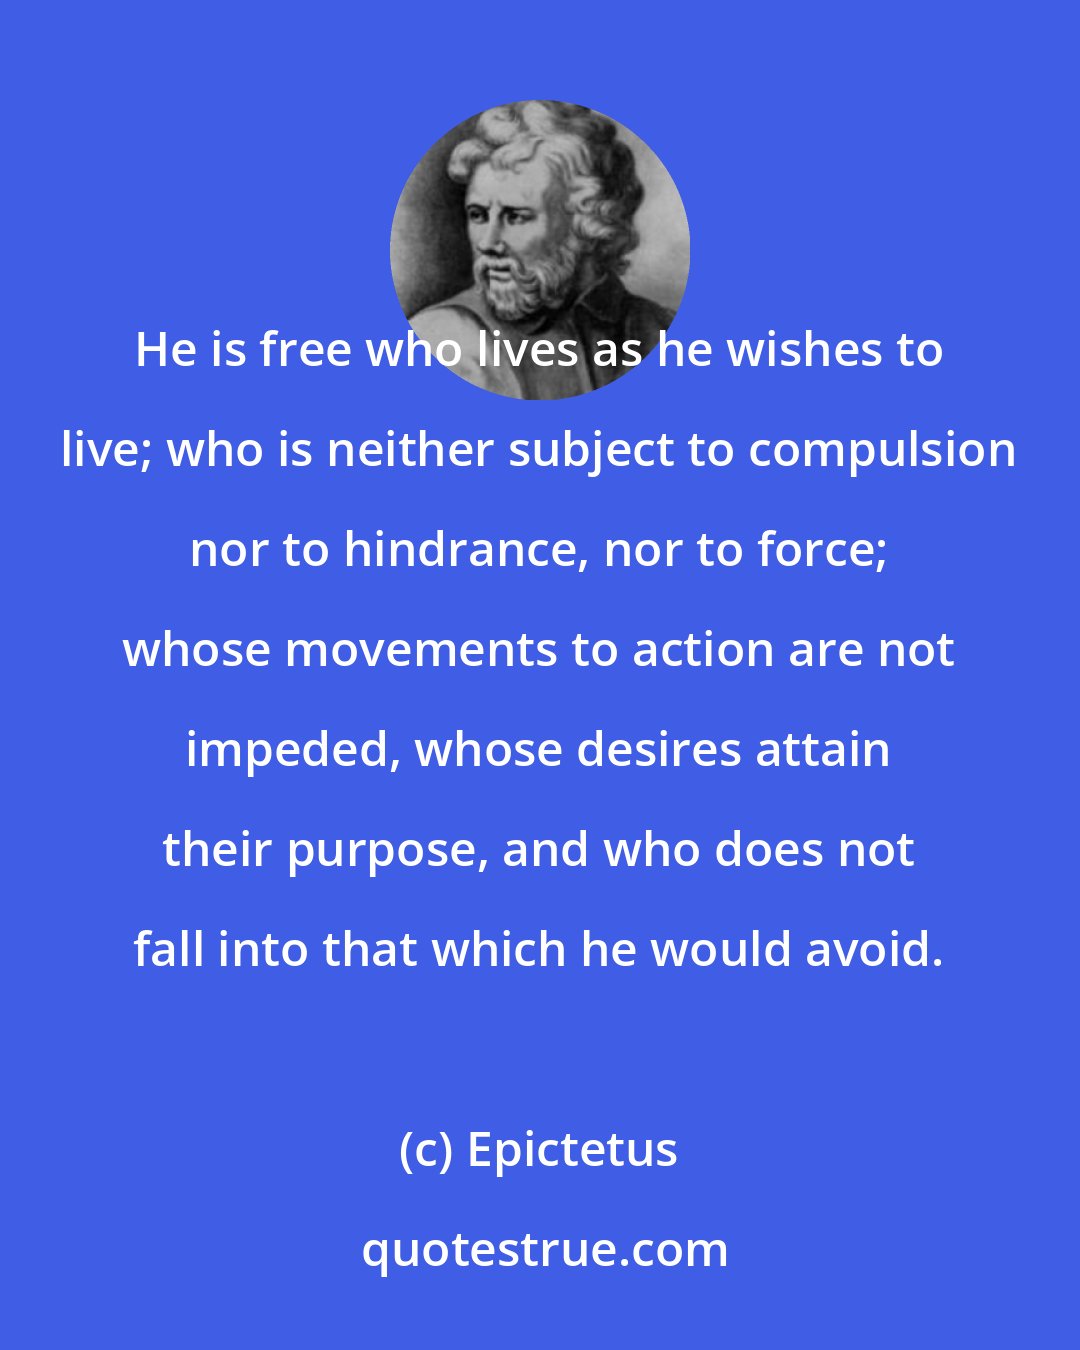 Epictetus: He is free who lives as he wishes to live; who is neither subject to compulsion nor to hindrance, nor to force; whose movements to action are not impeded, whose desires attain their purpose, and who does not fall into that which he would avoid.